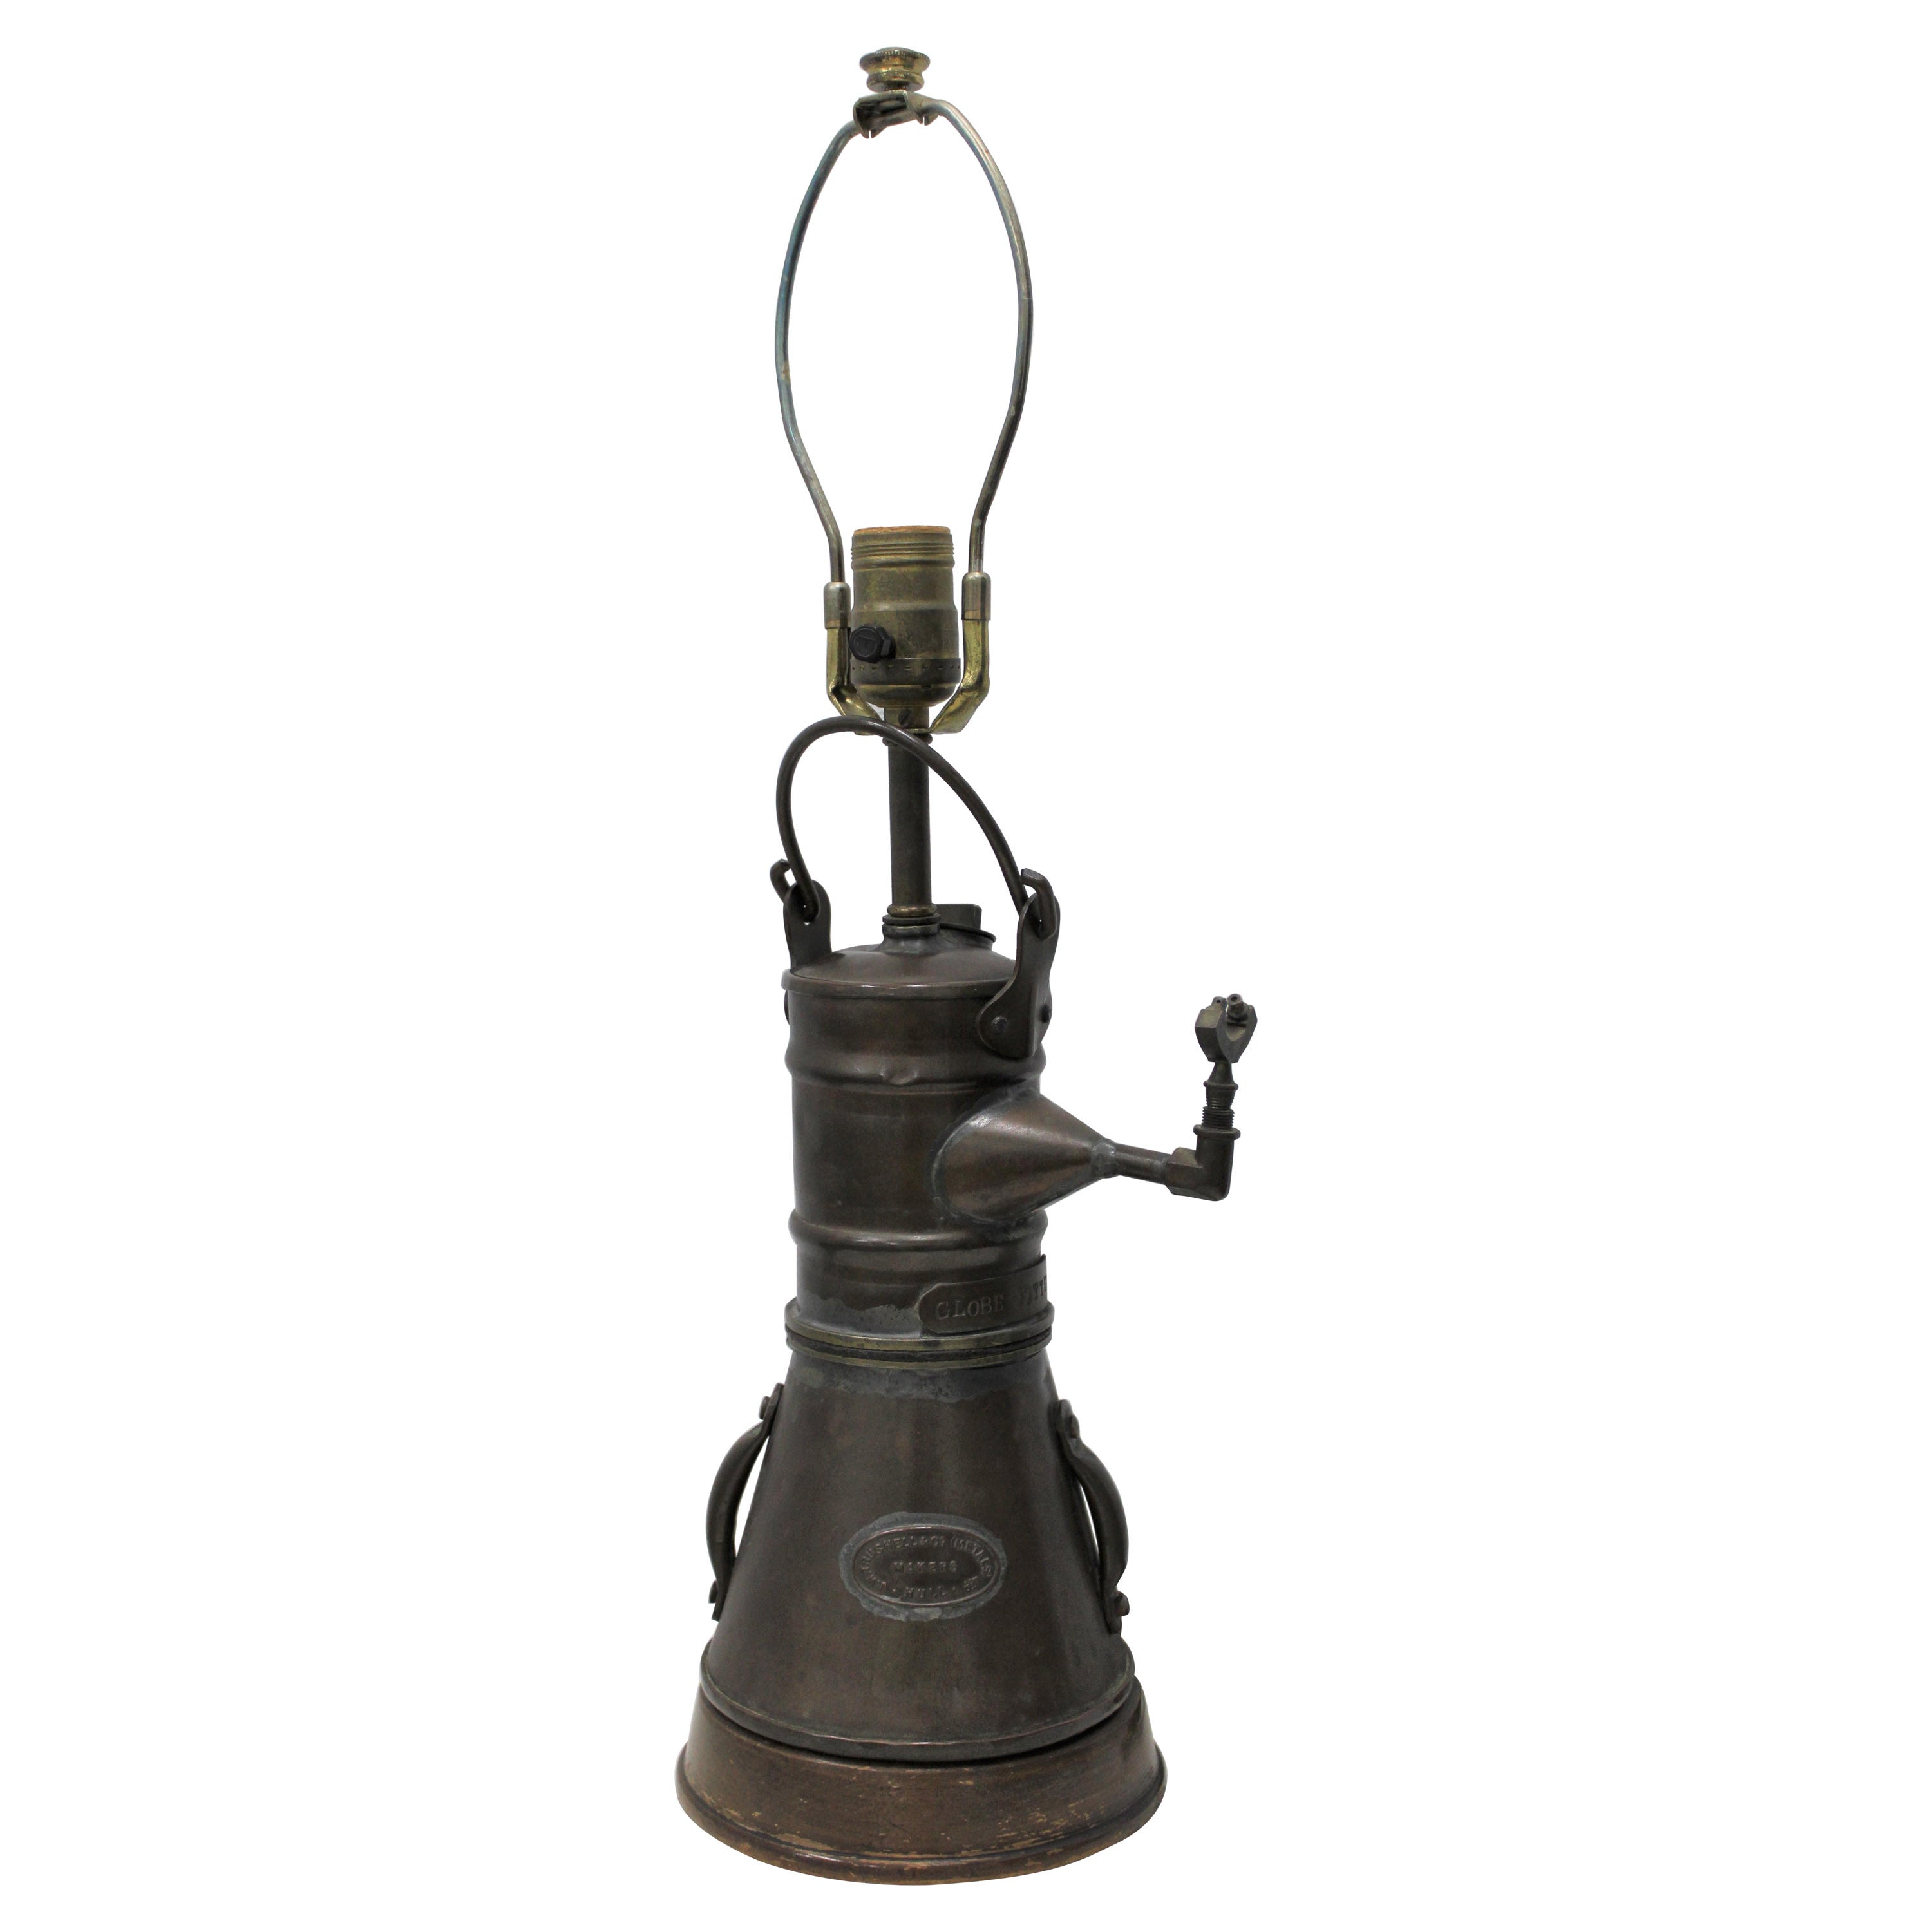 J. W Trushell & CO. Converted Lamp For Sale